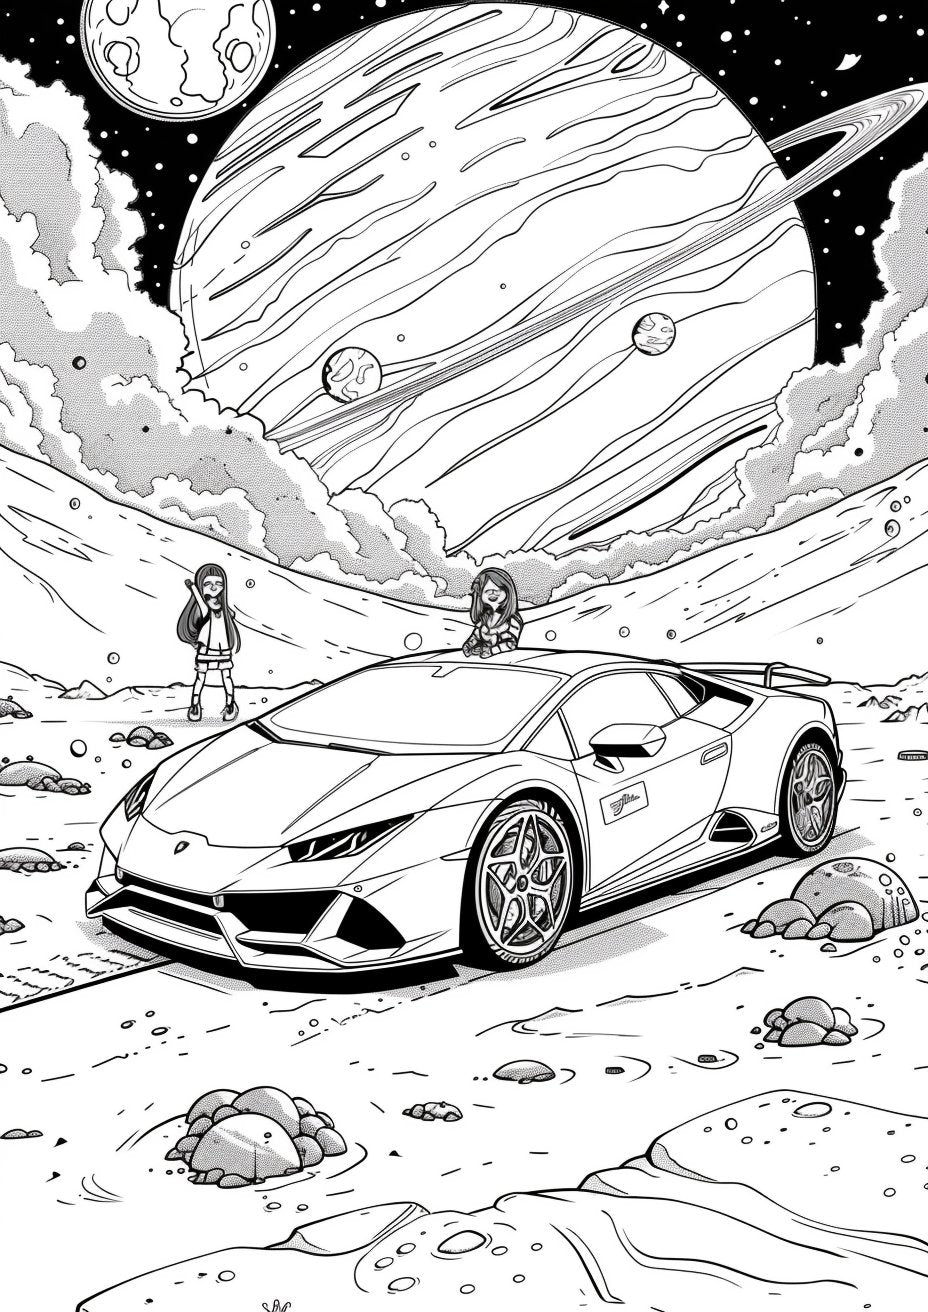 45 Cool Sports Cars Coloring Pages - My Coloring Zone